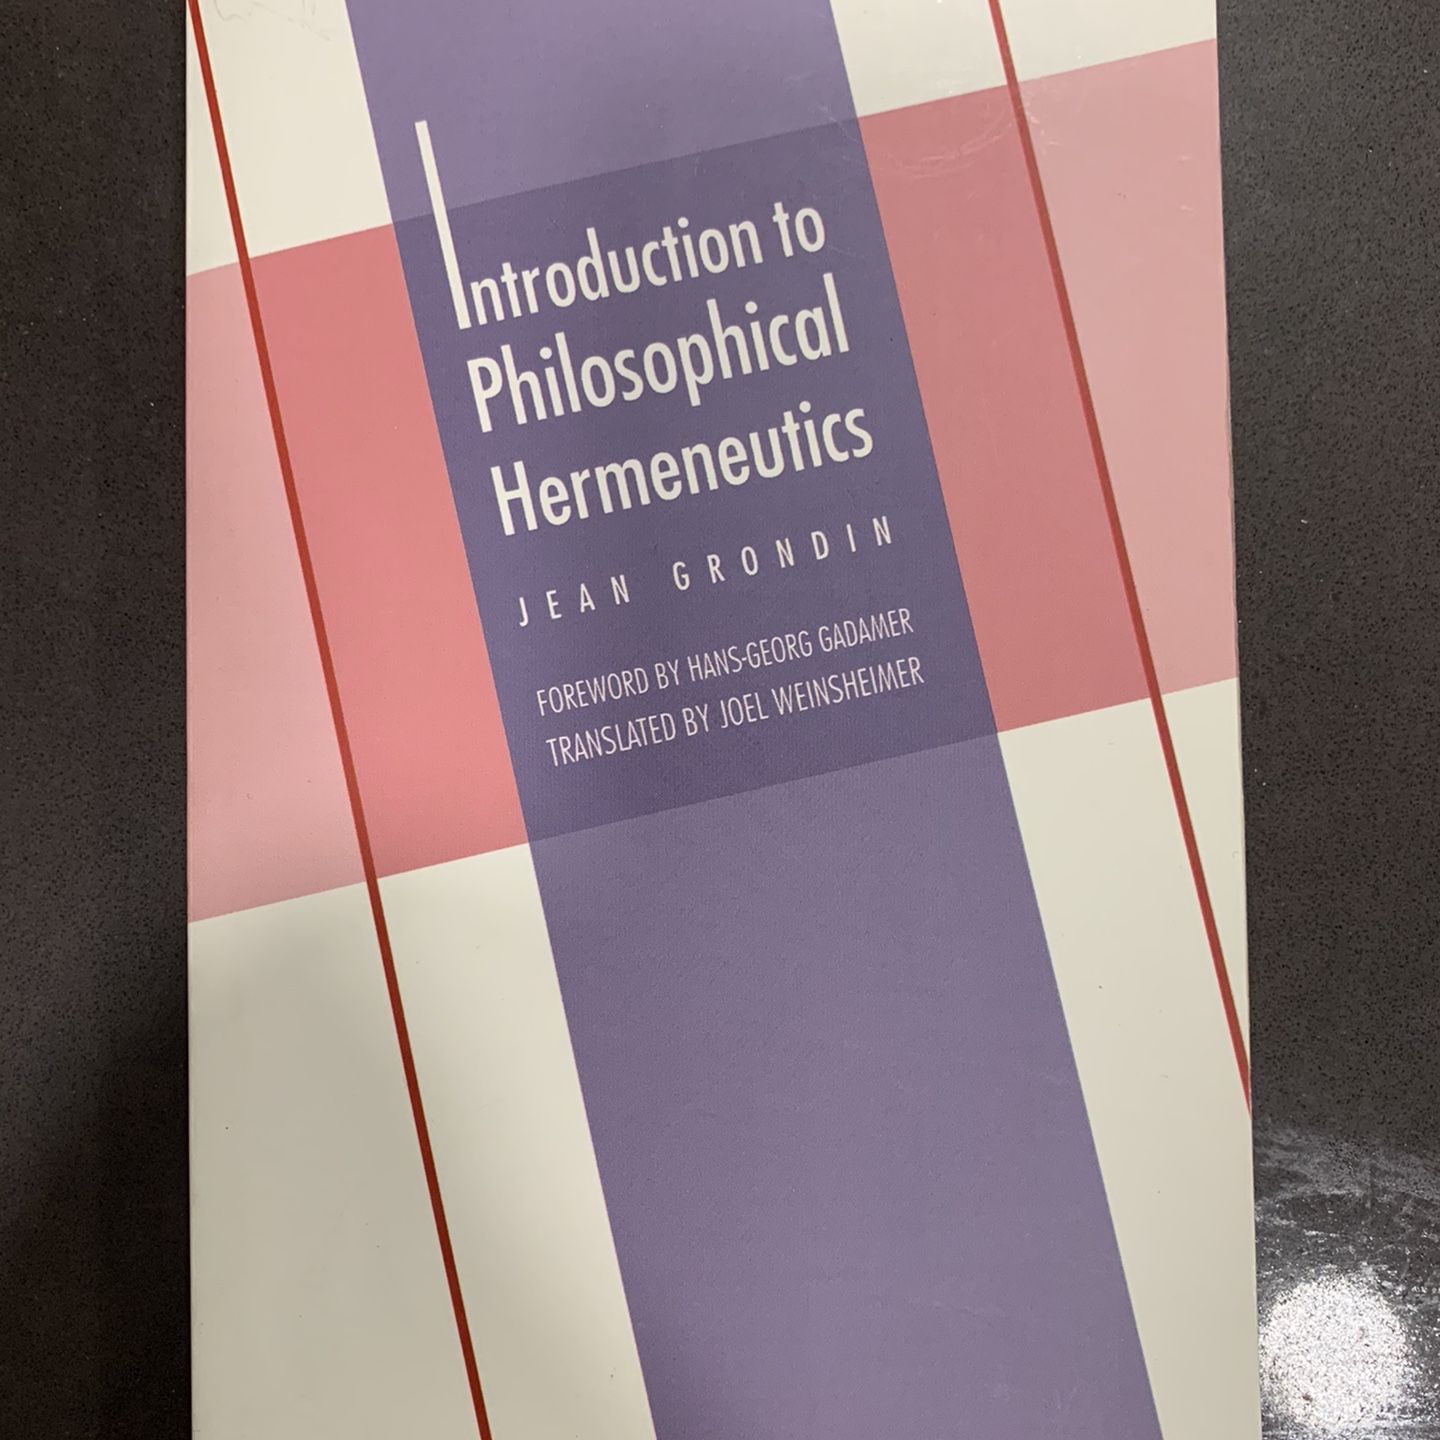 Introduction To Philosophical Hermeneutics by Jean Grondin